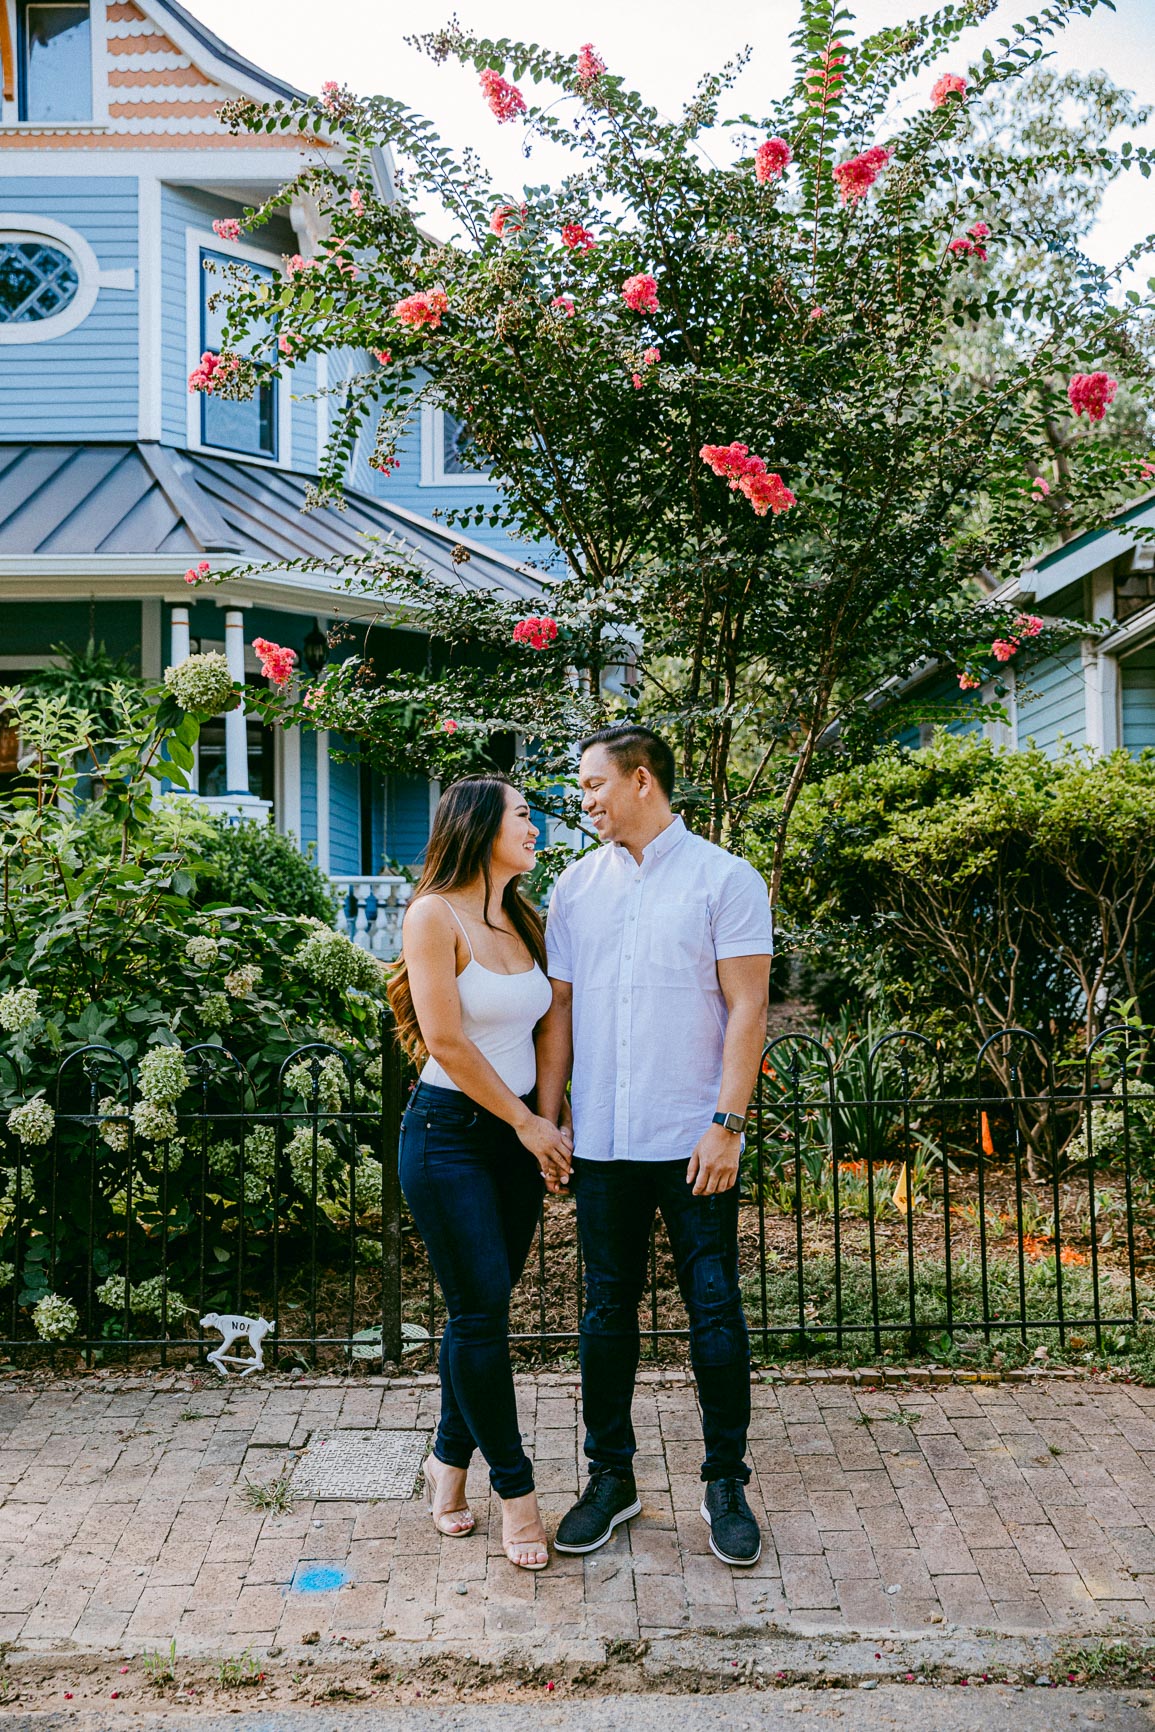 Uptown Charlotte engagement session shot by Nhieu Tang Photography|nhieutang.com